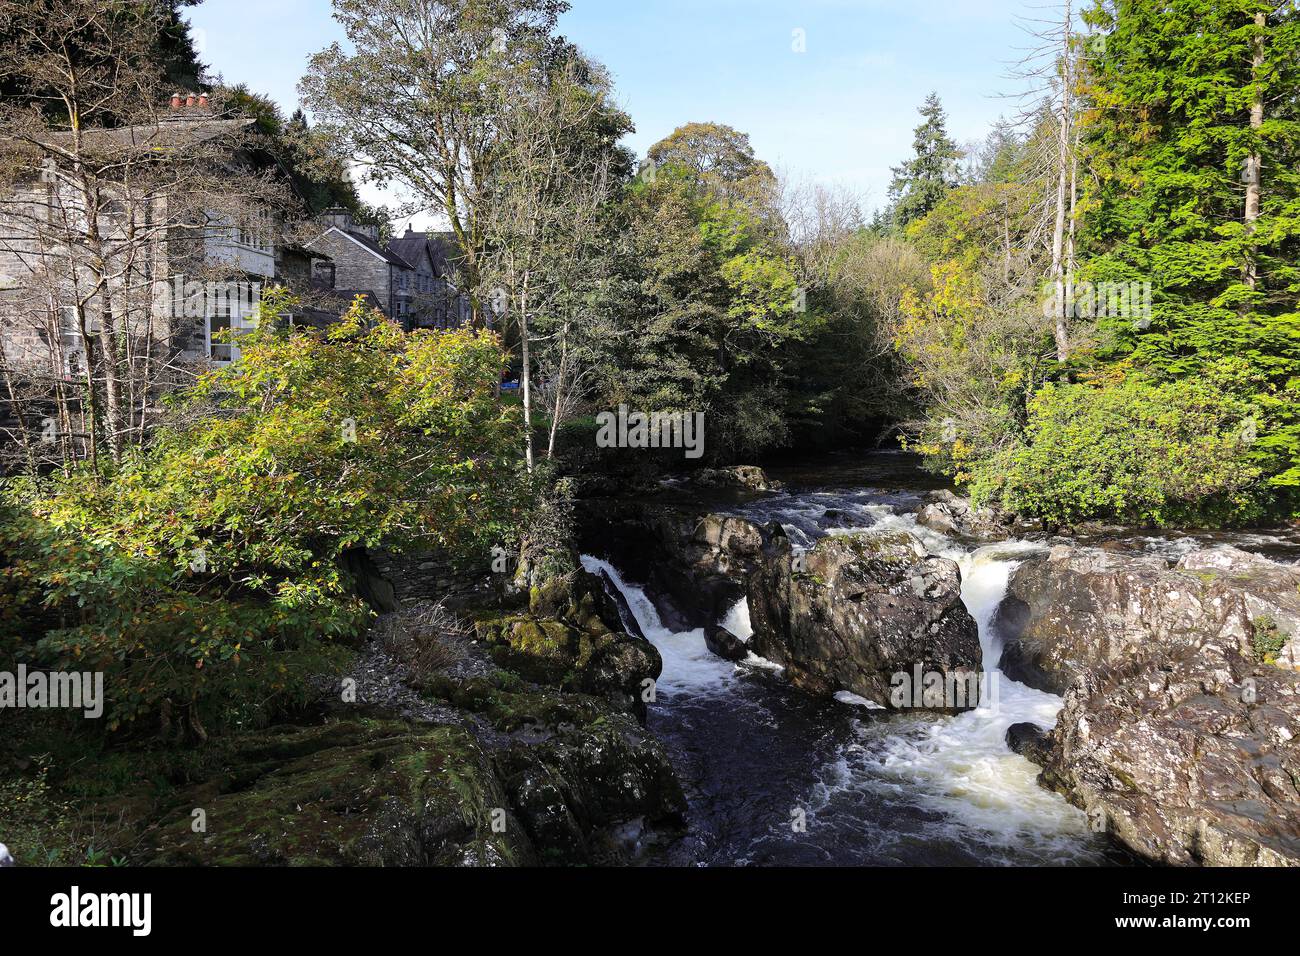 Landscape images along Afon River Llugwy near Betws-Y-Coed in the Snowdonia National Park in Wales, UK Stock Photo